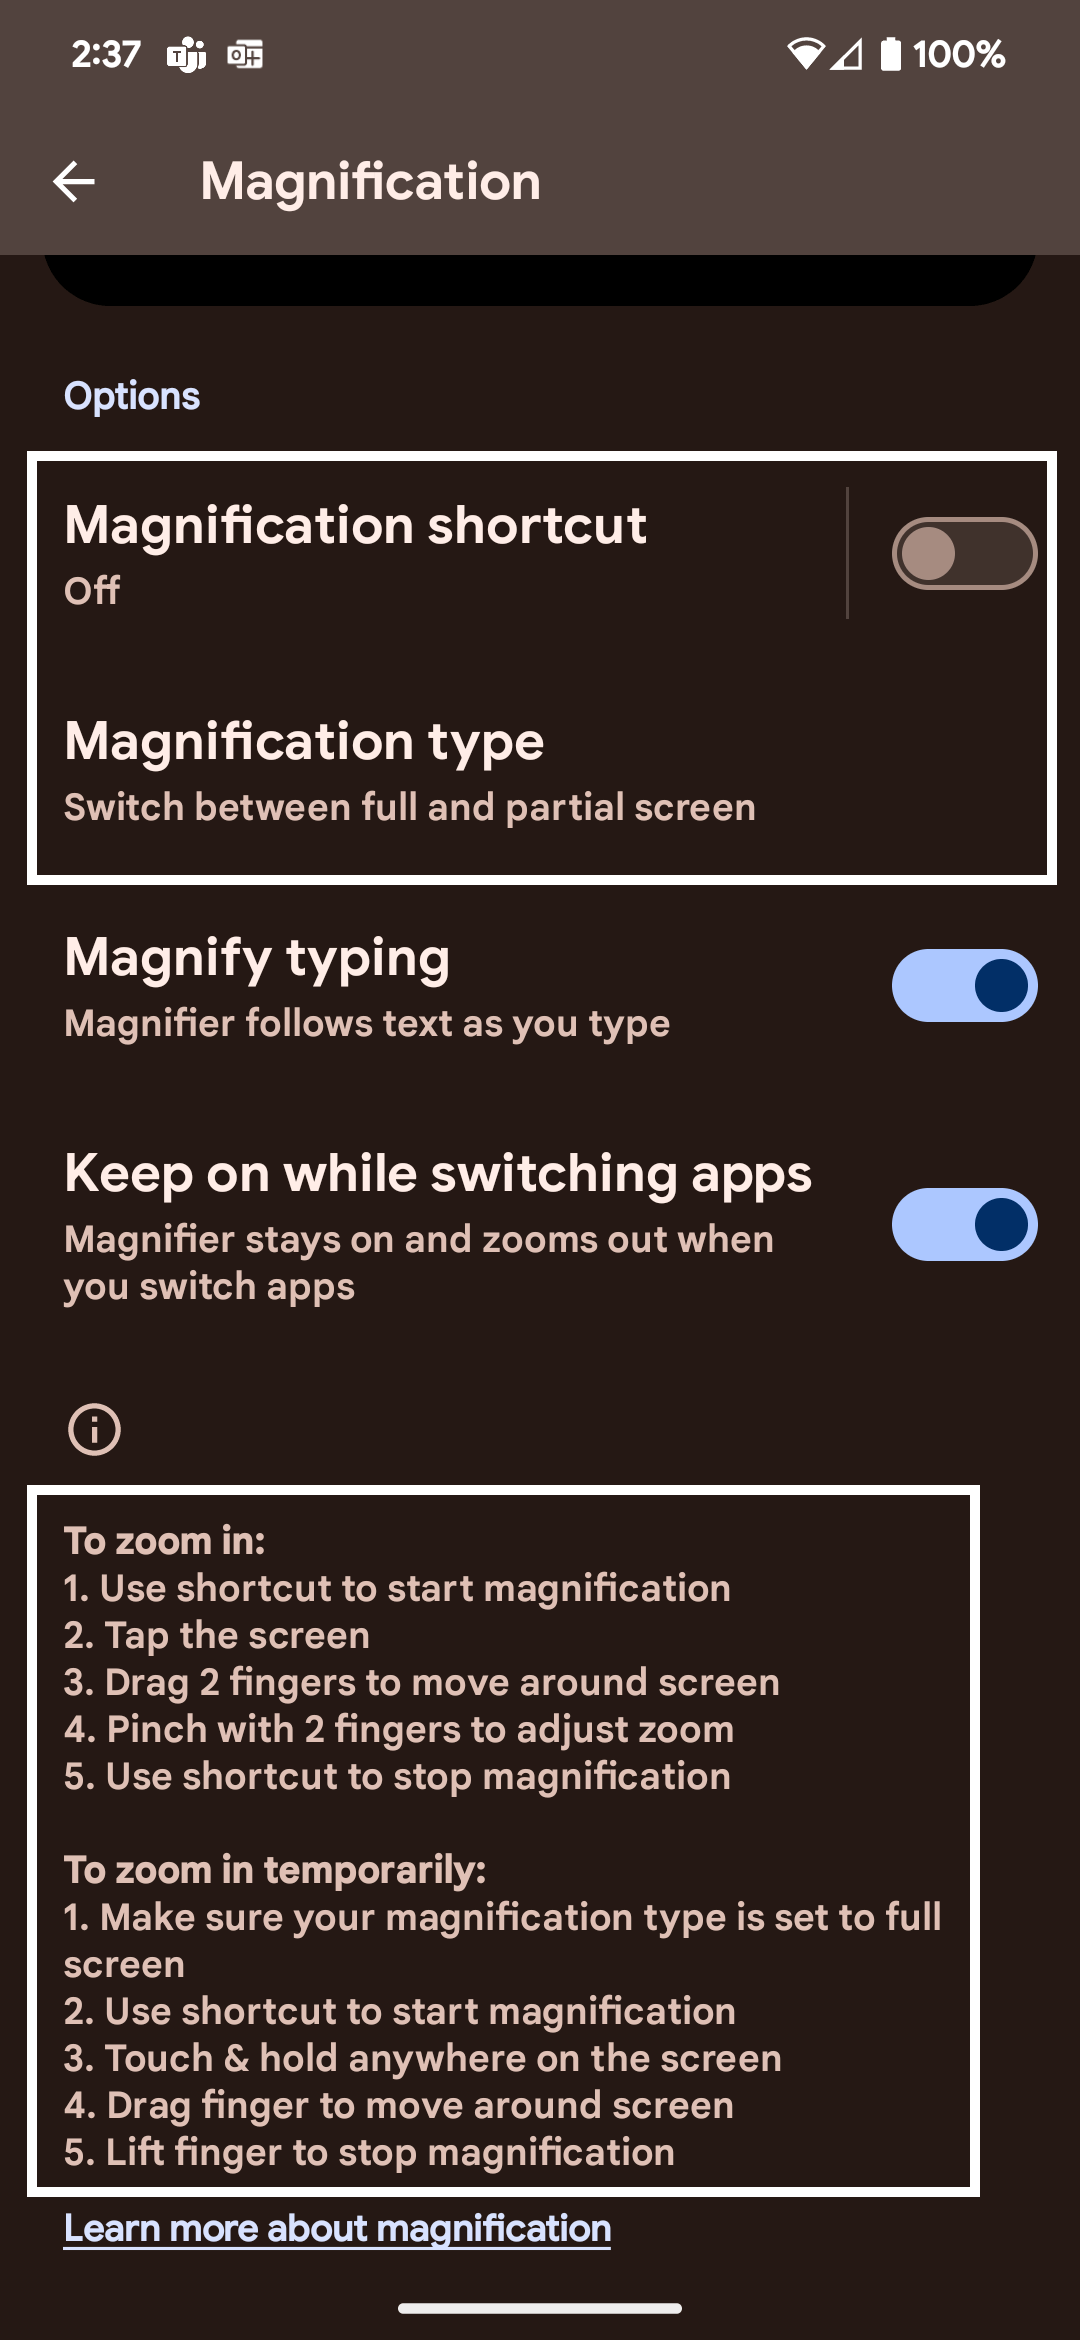 Screenshot of Android magnification settings. The Android shortcut is toggled off and the Magnification Type is emphasized with a white box. Instructions to zoom in are: 1. Use shortcut to start magnification. 2. Tap the screen. 3. Drag two fingers to move around the screen. 4. Pinch with two fingers to adjust zoom. 5. Use shortcut to stop magnification.